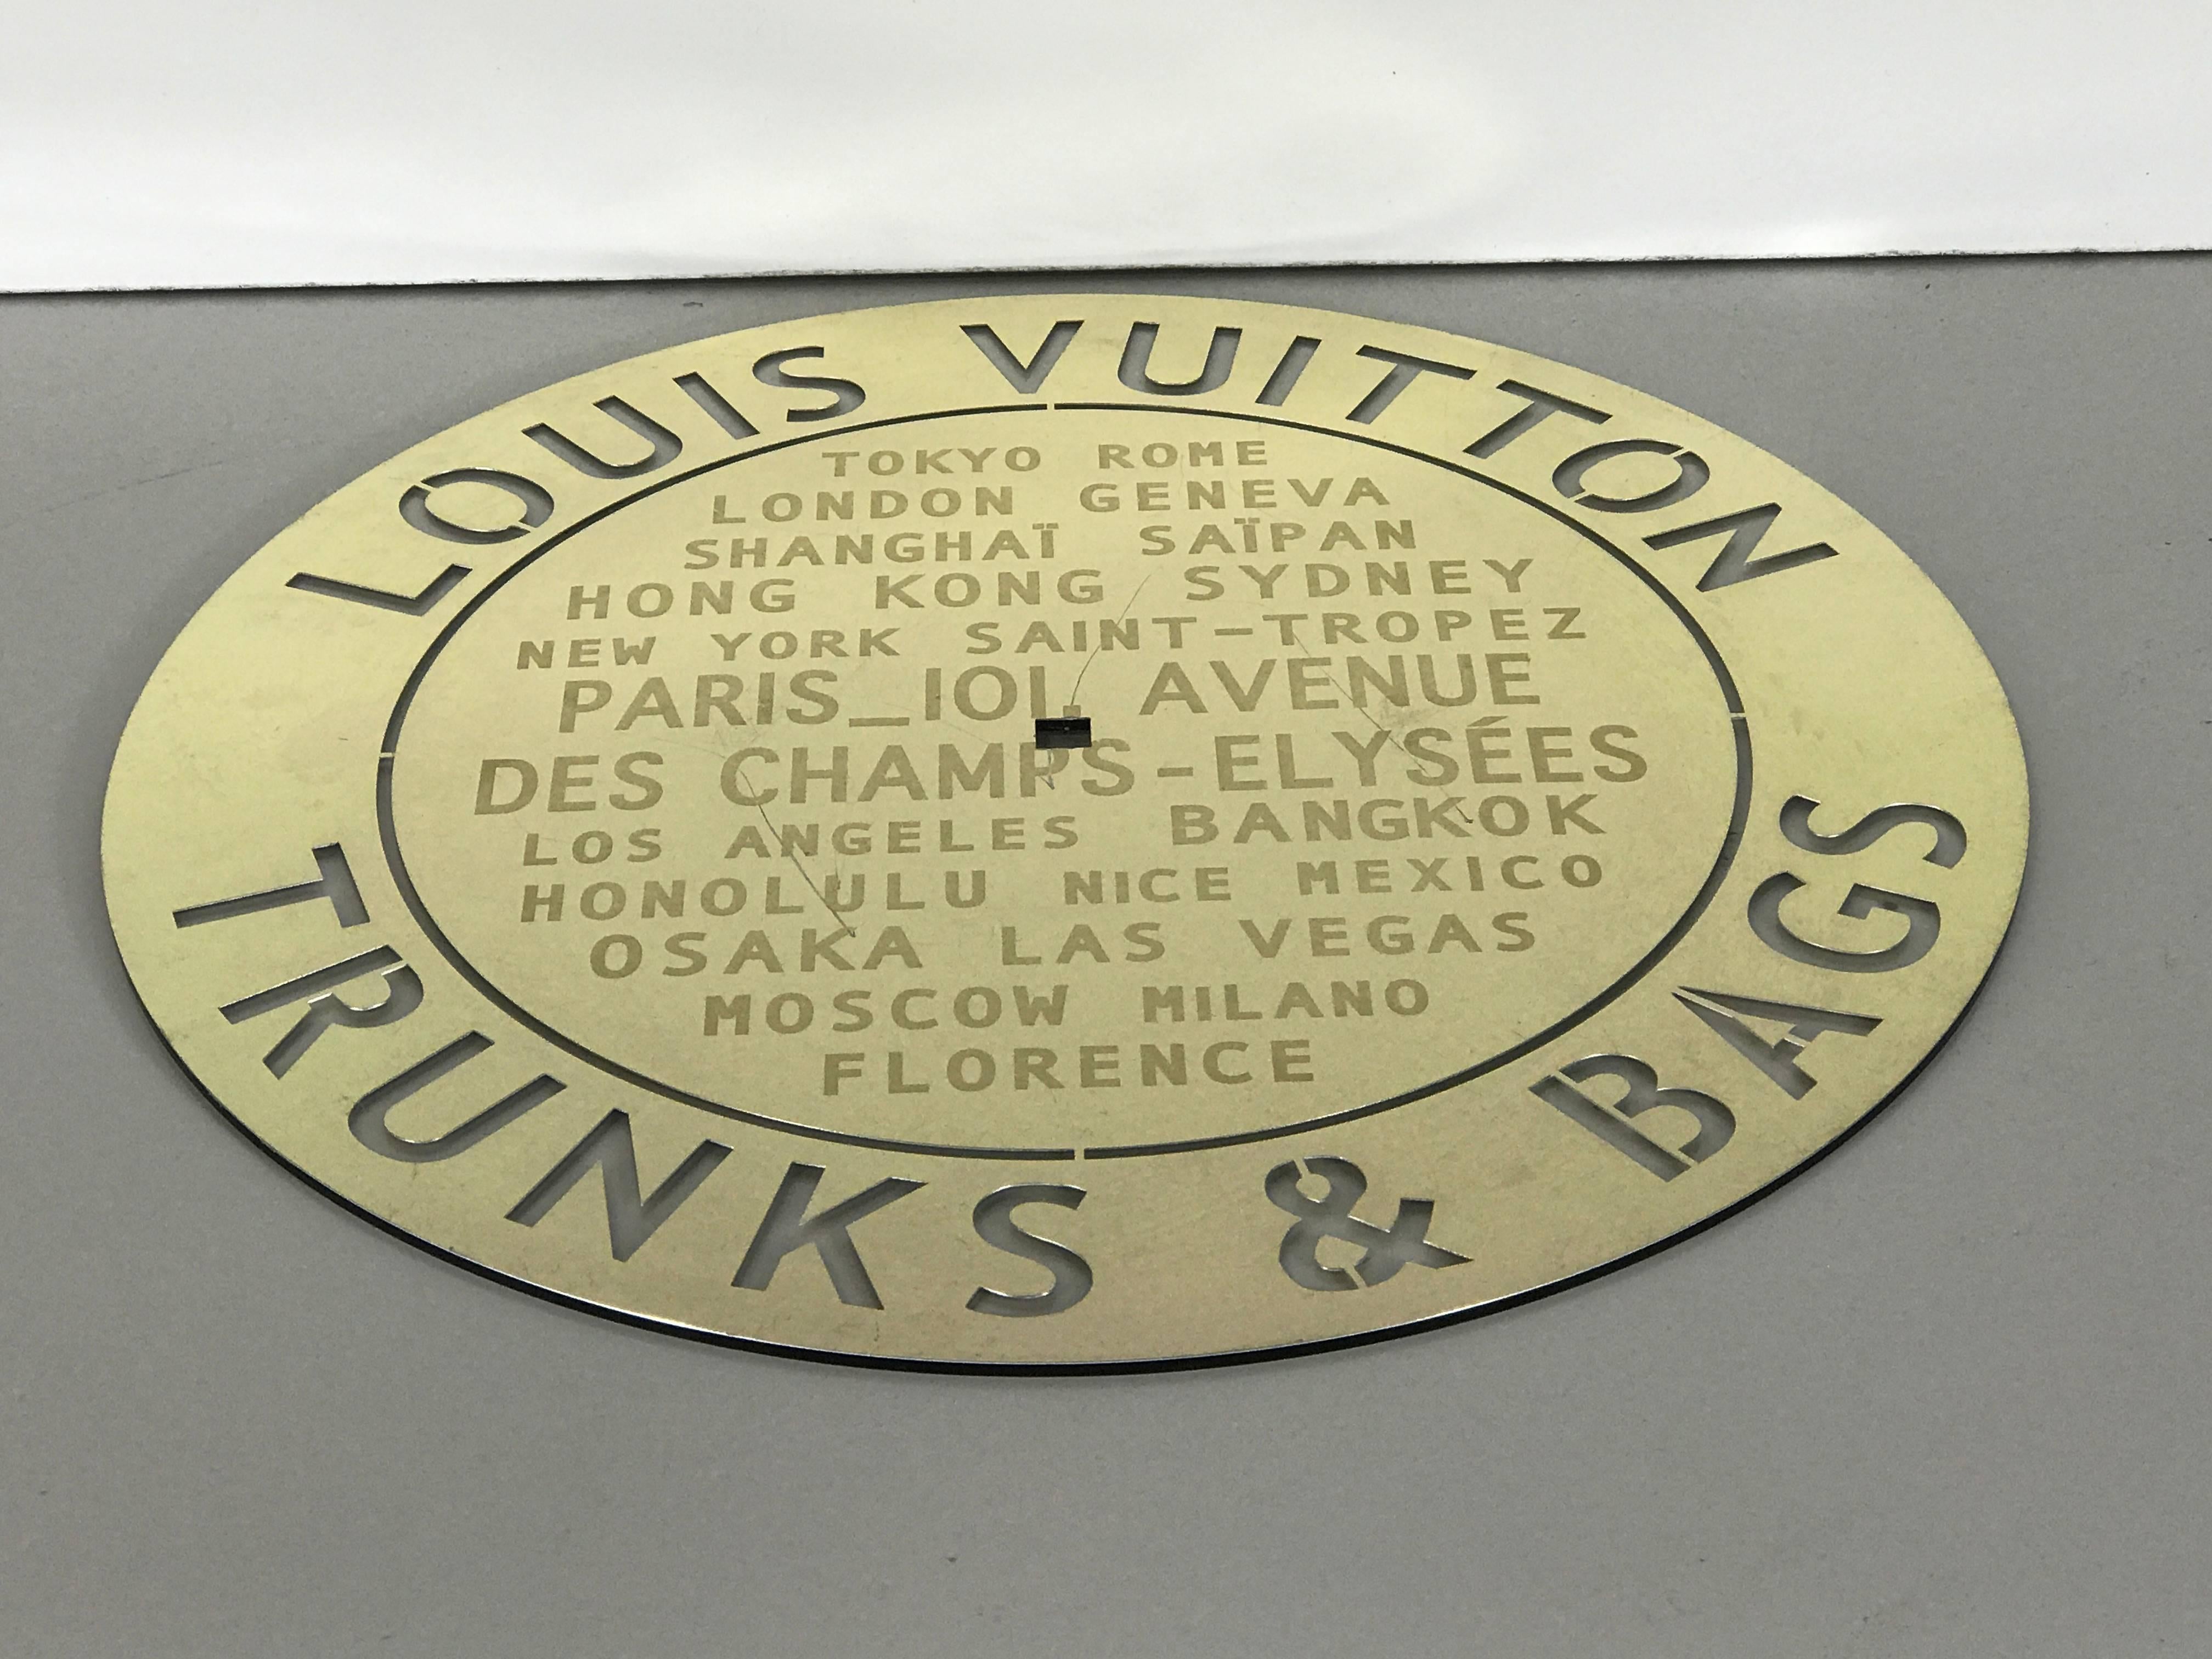 Louis Vuitton store plaque, with center square hole for mounting.